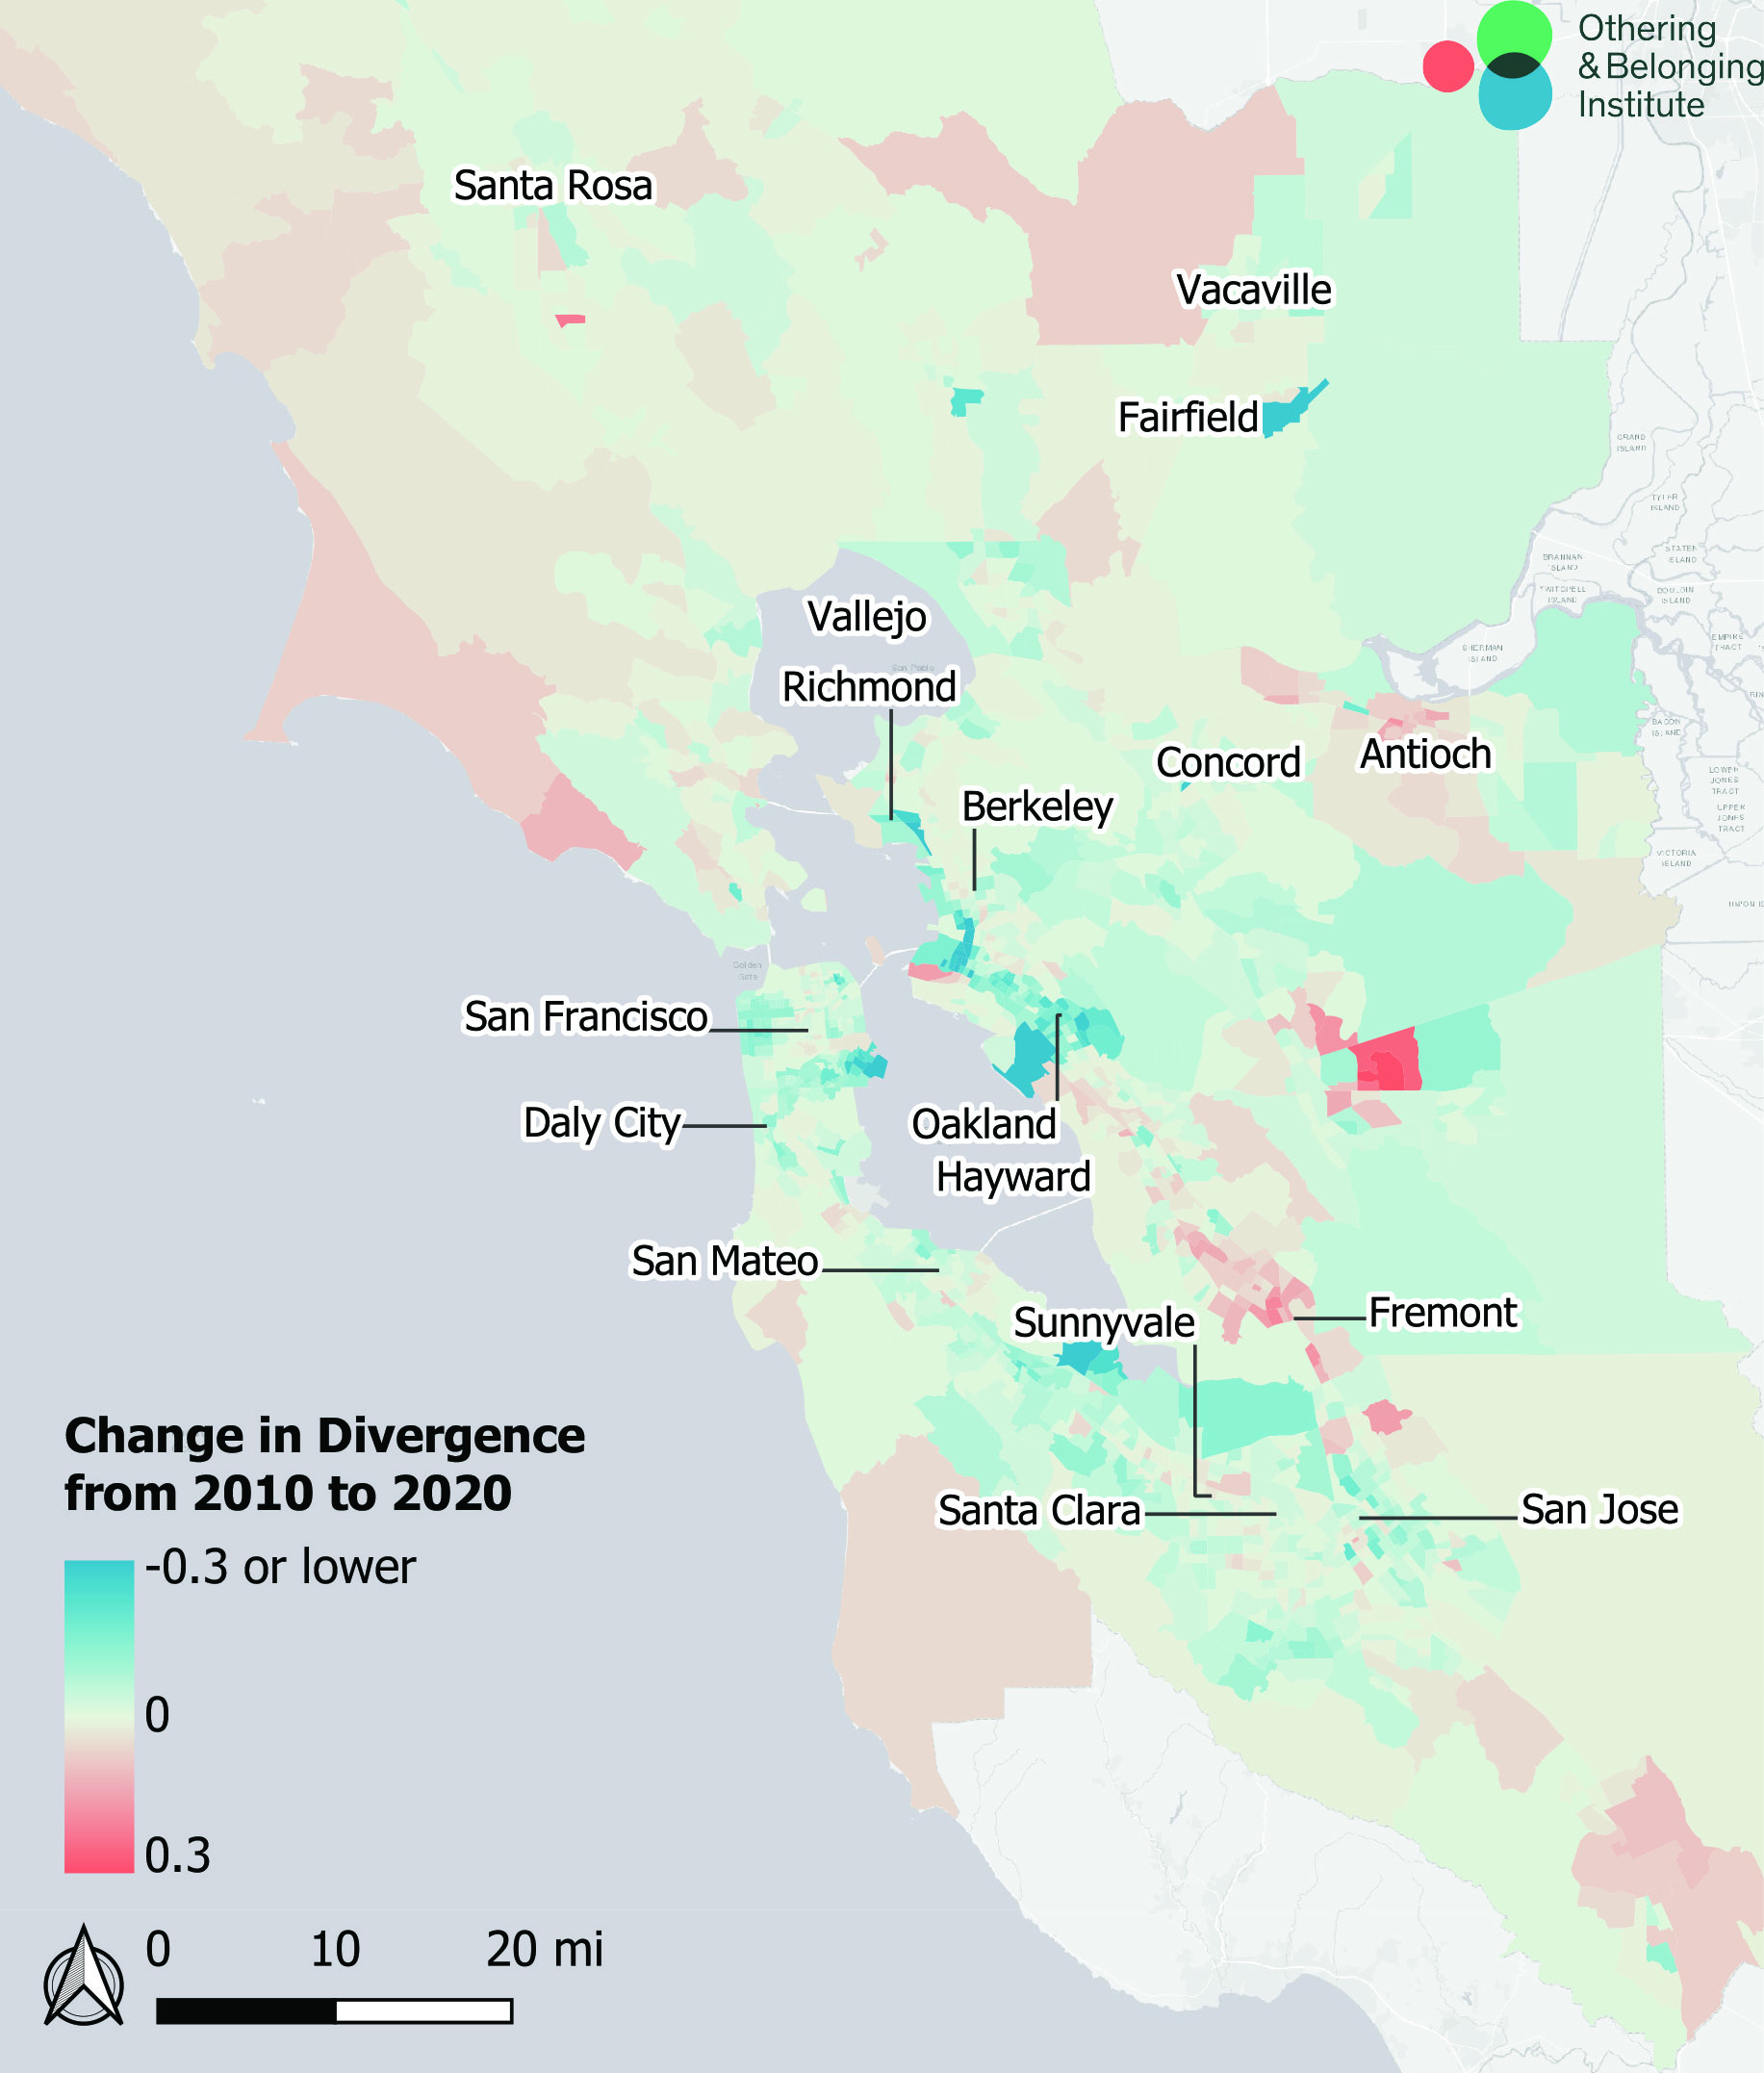 Map of the Bay Area demonstrating change in divergence from 2010-2020